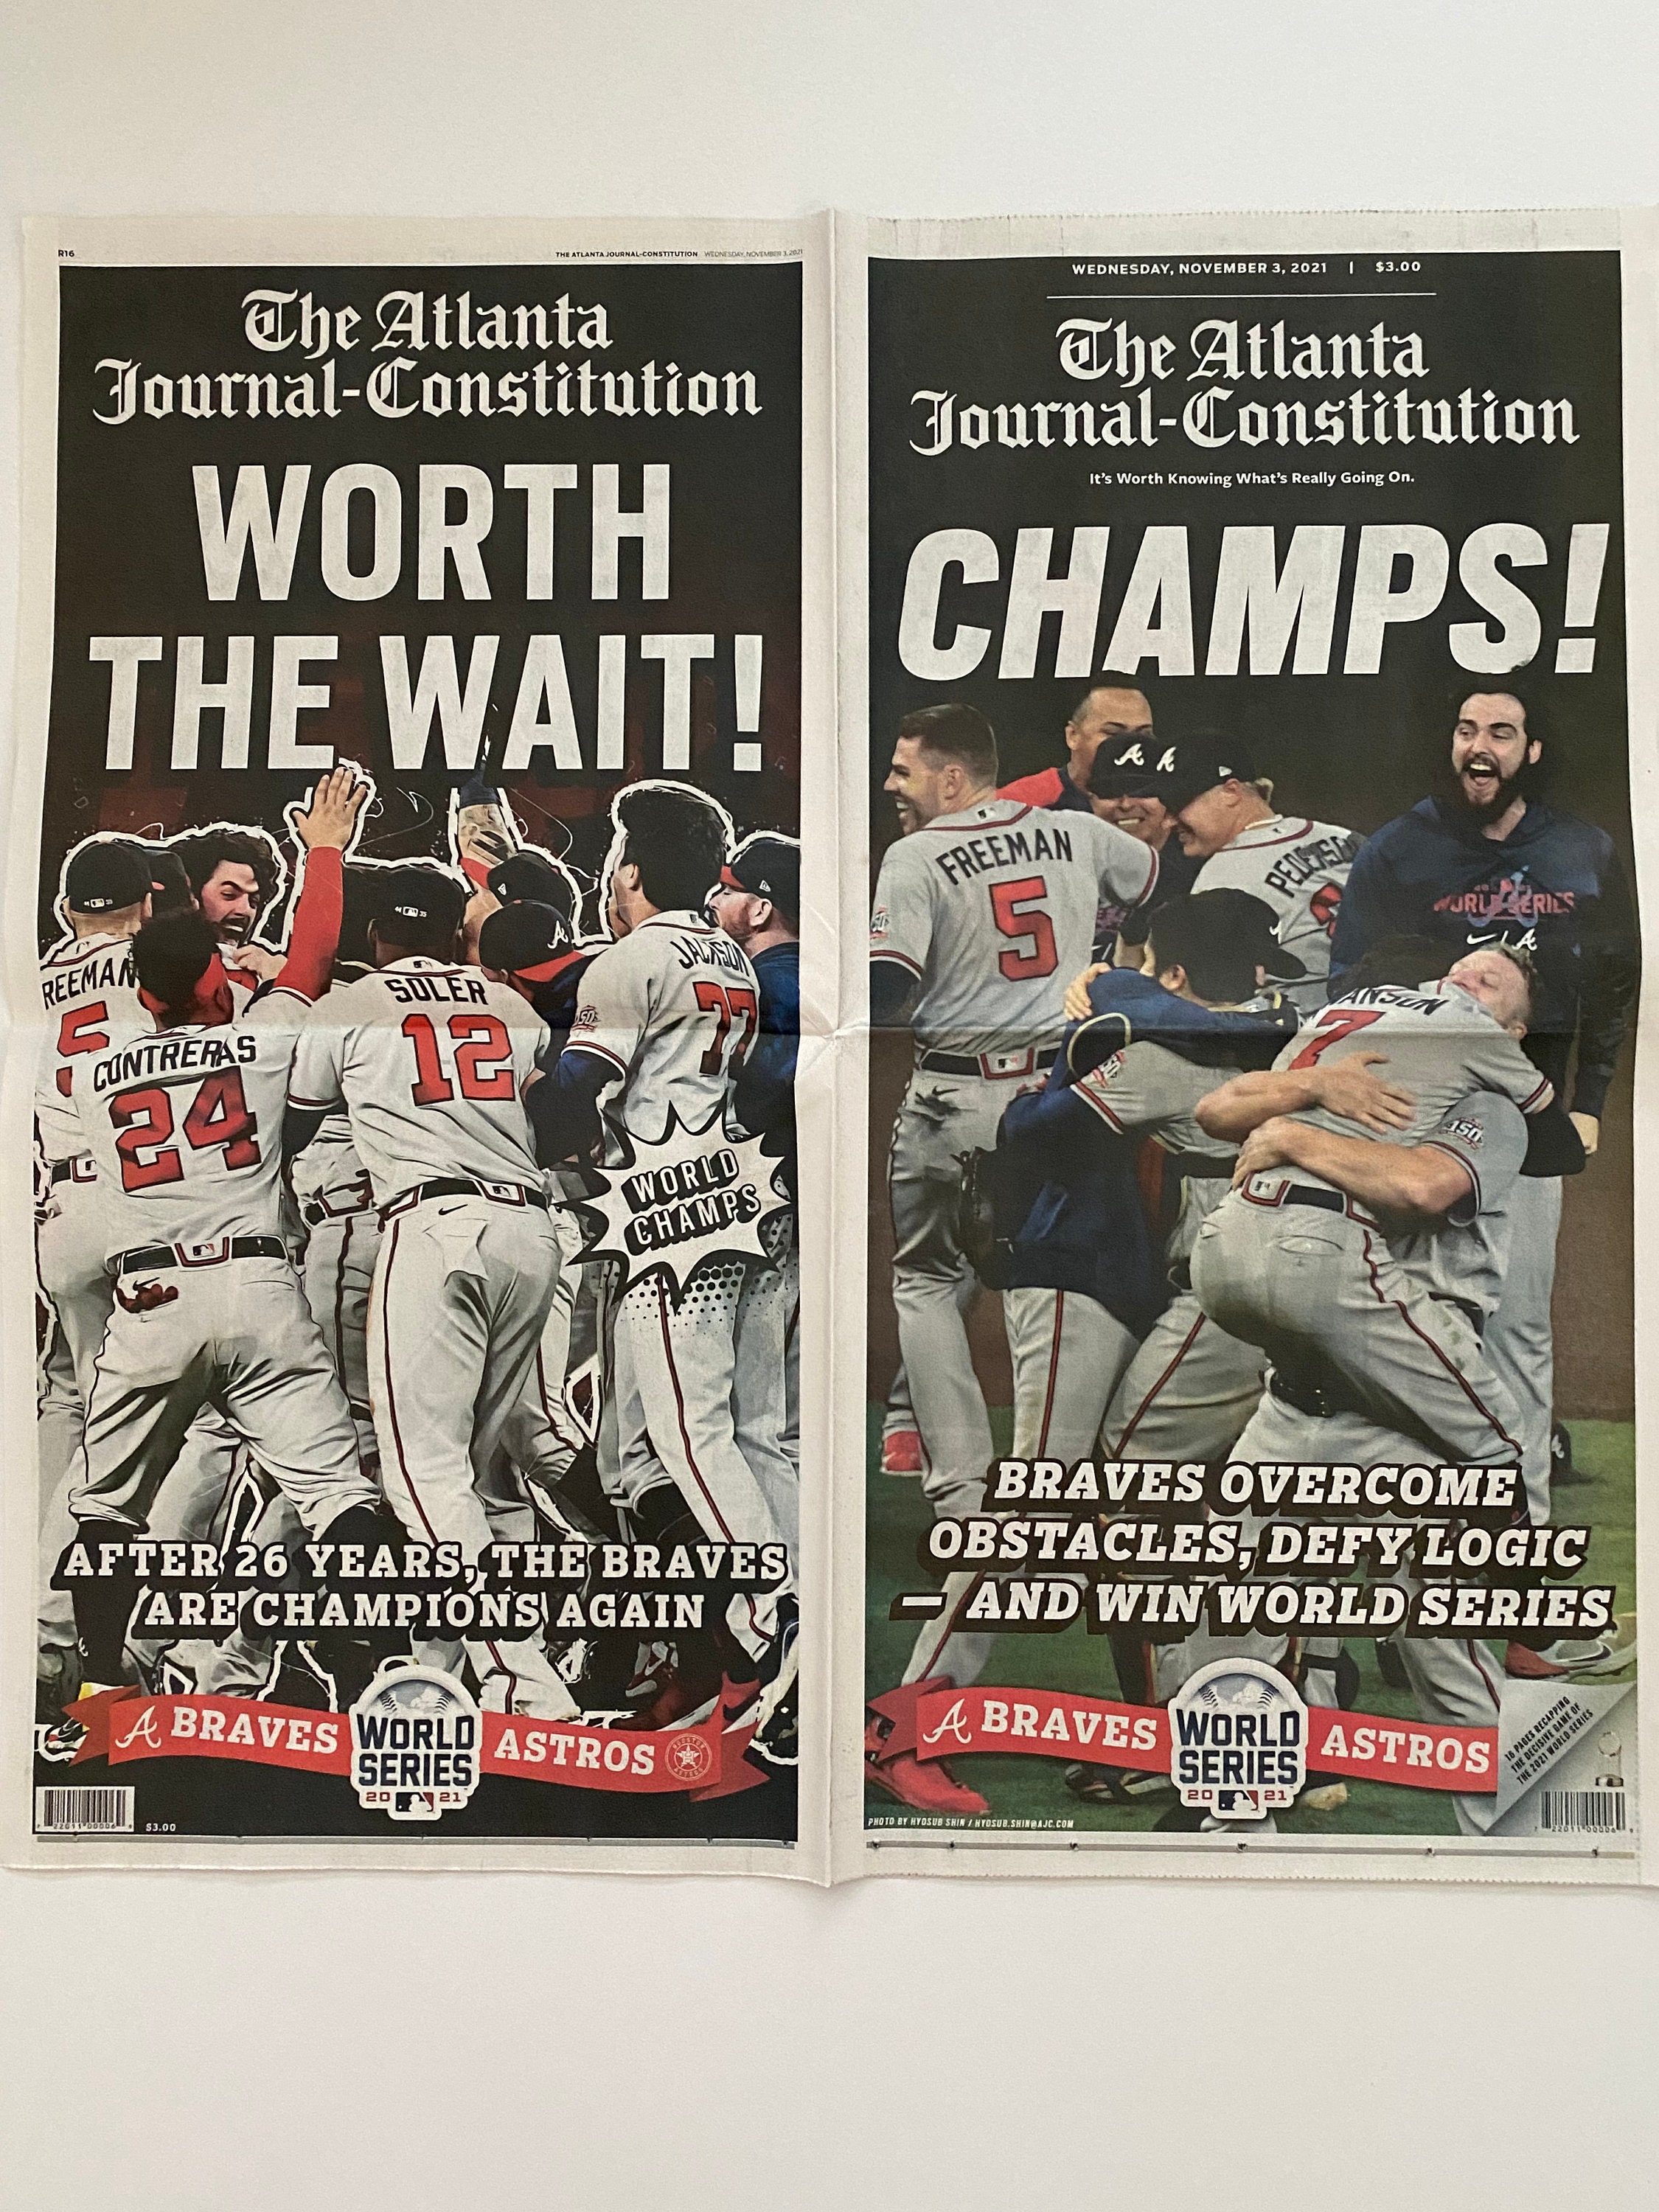 Atlanta Braves AJC World Series Limited Edition Newspaper Original  Wednesday Edition. Full 16 Pages. Will Ship Out Next Day. Over 700 Sold. 